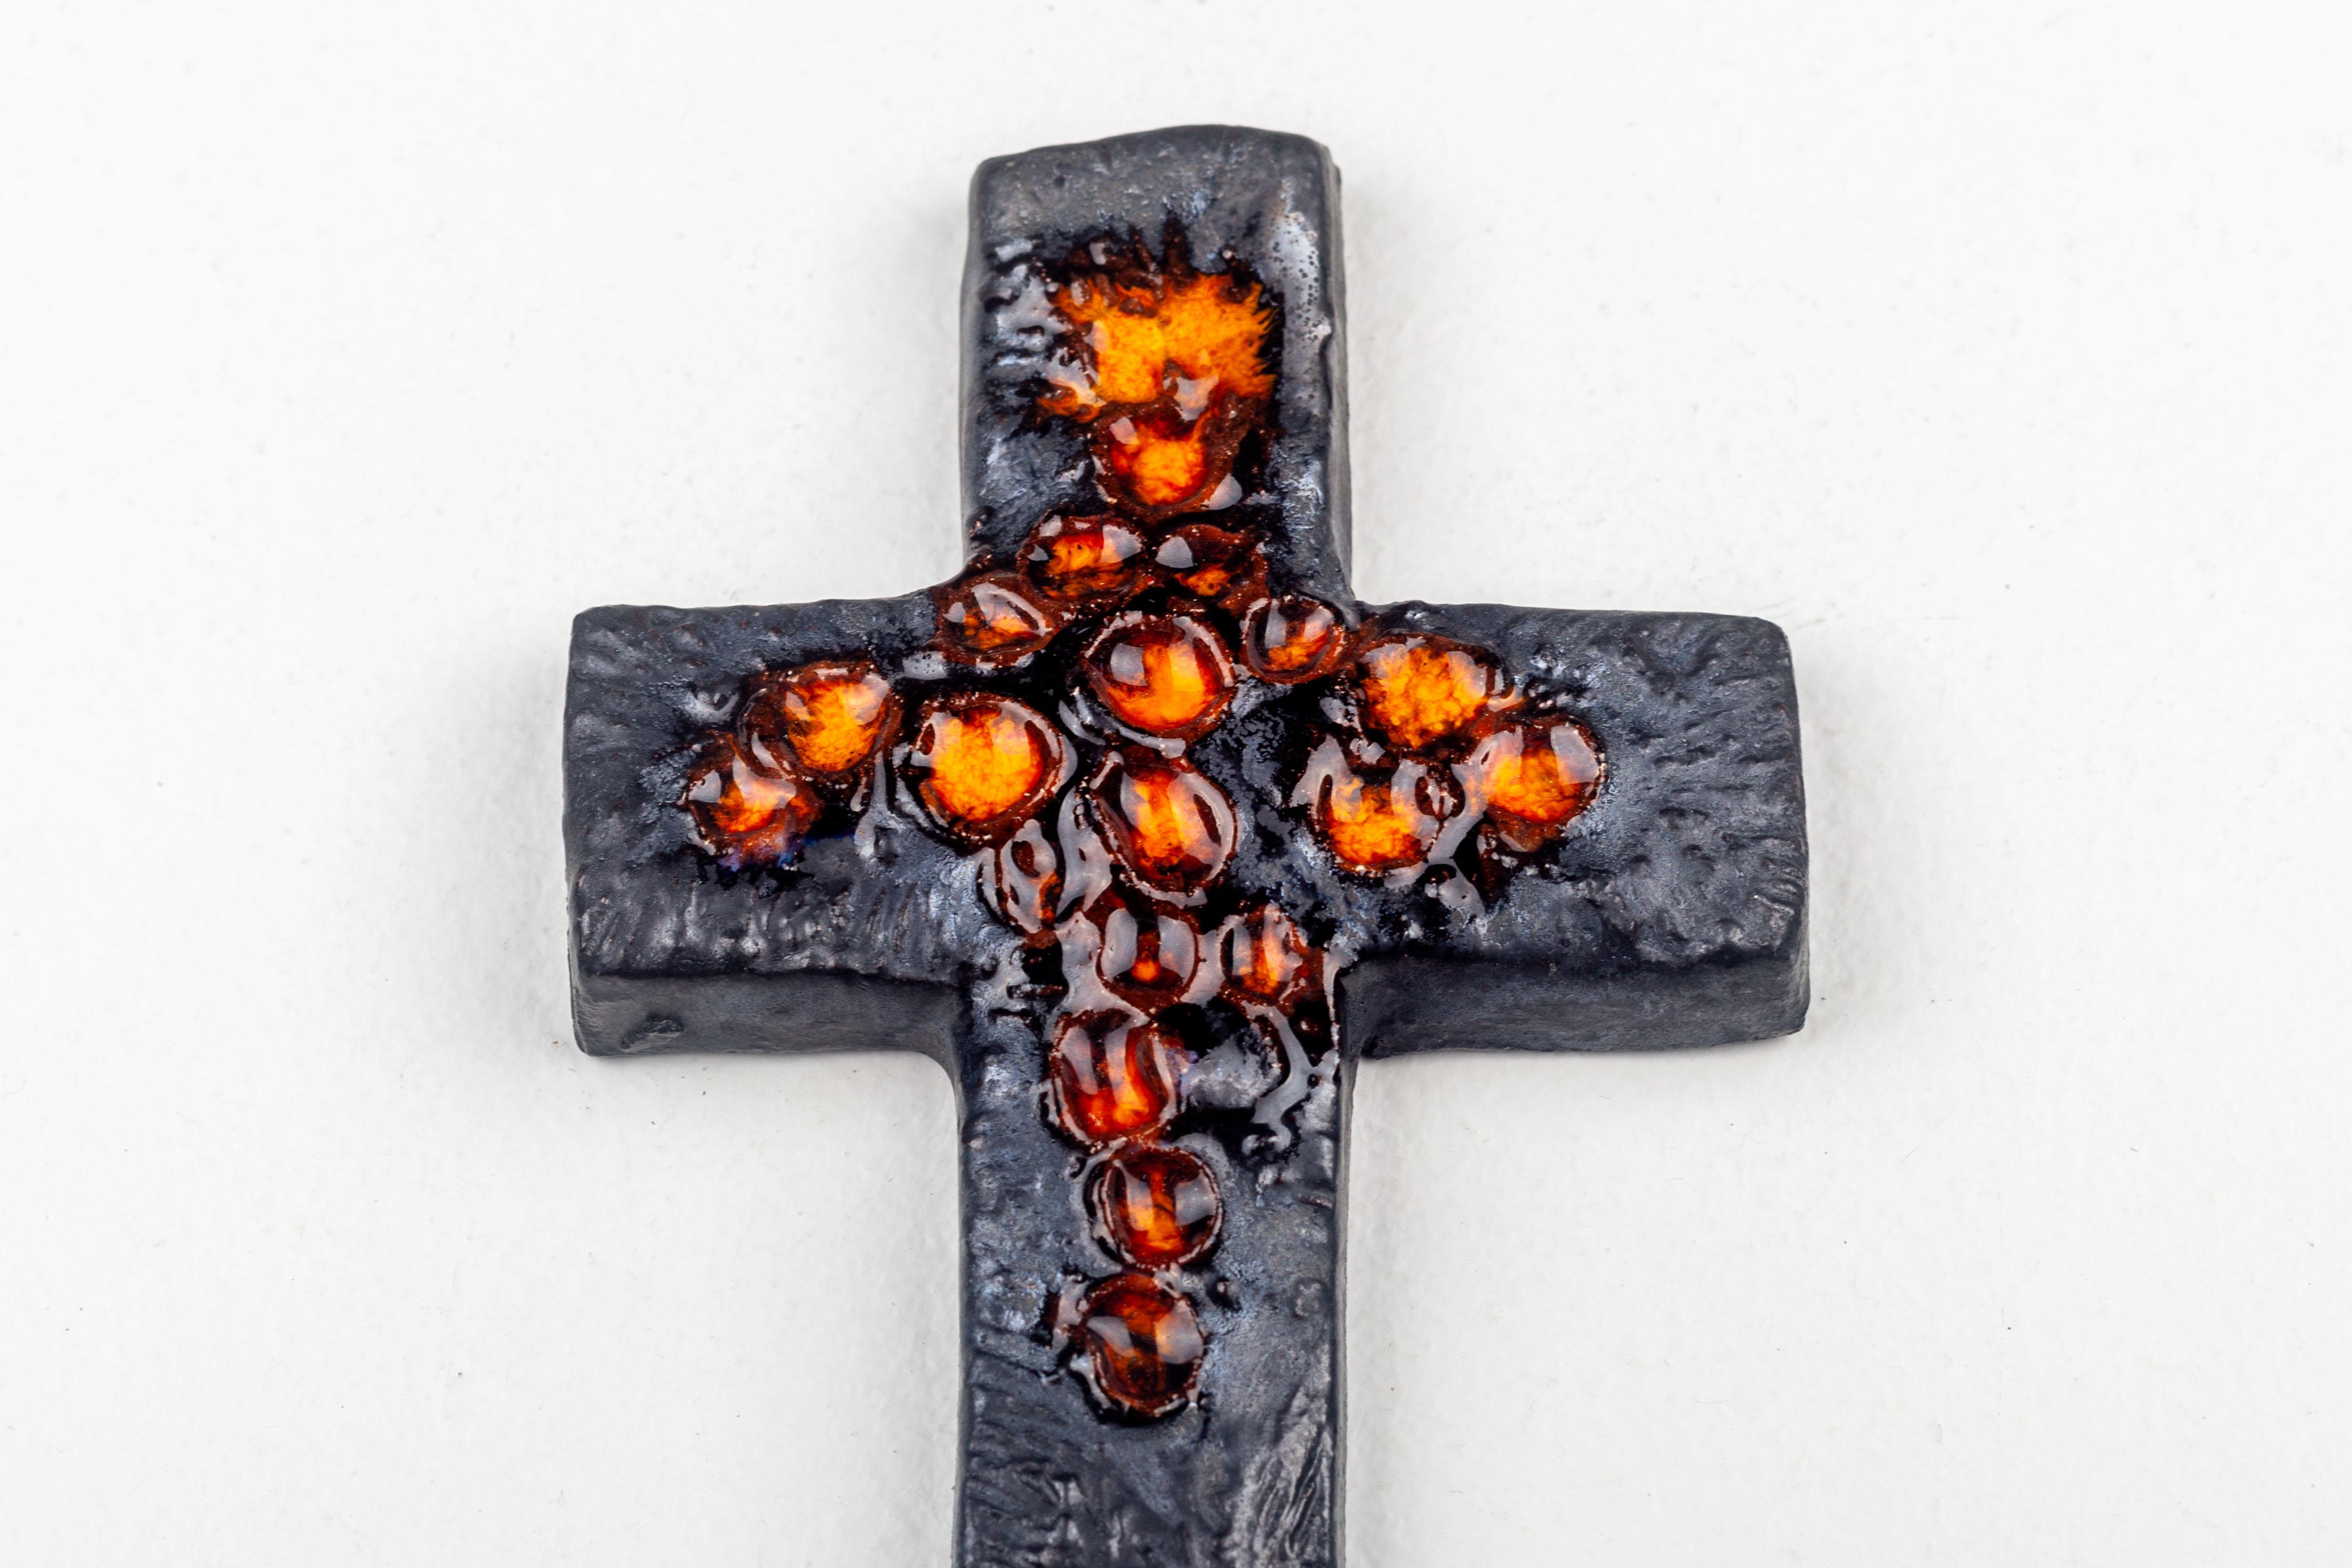 This evocative ceramic cross exemplifies the innovation and artistic exploration that defined mid-century modern studio pottery in Europe. Crafted in the 1950s or 1960s, the piece is notable for its textured, almost lunar surface — a technique that